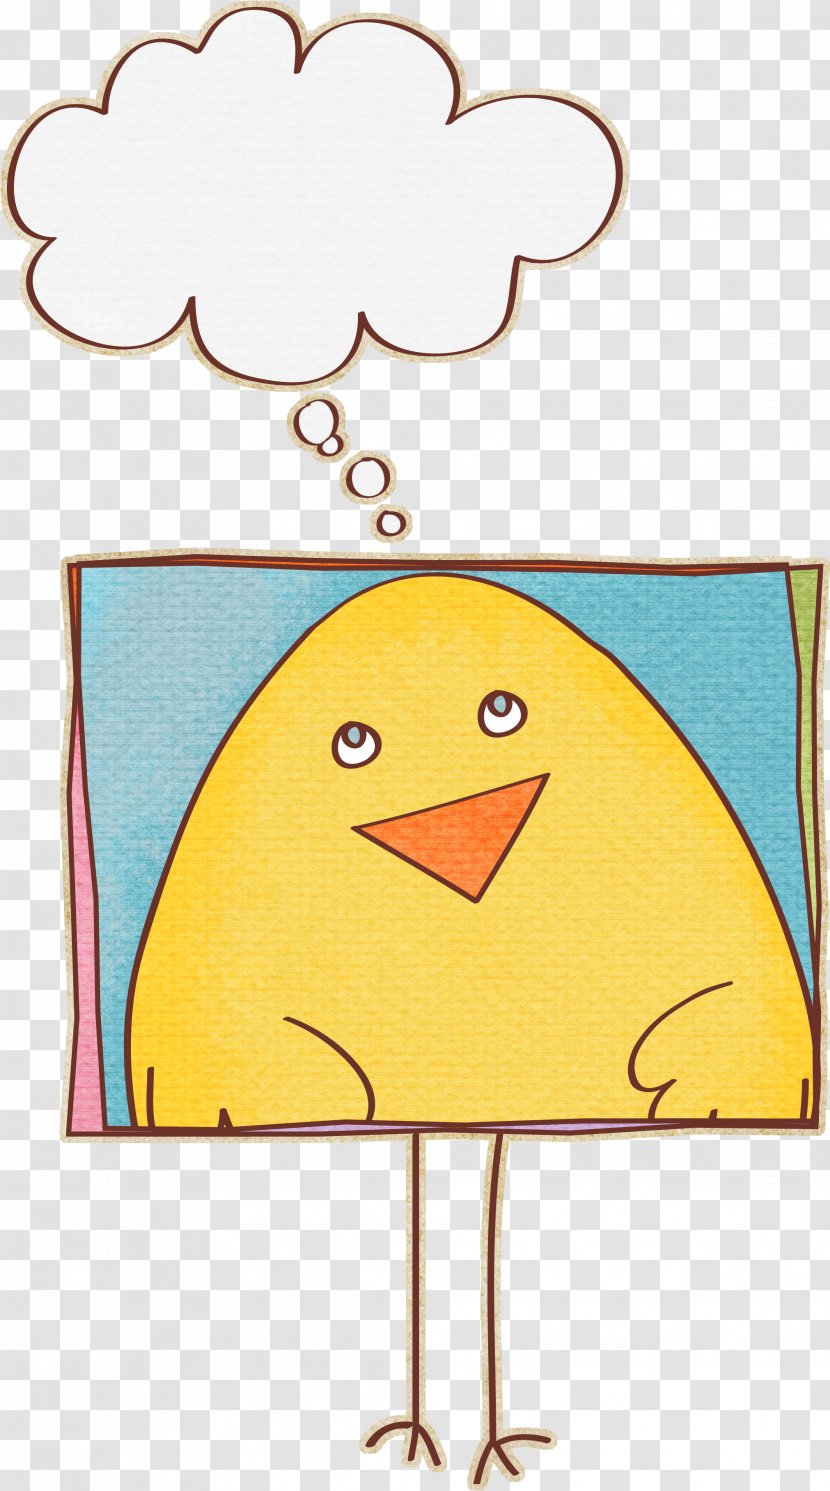 Download Clip Art - Text - Hand Drawn Cute Chick Transparent PNG